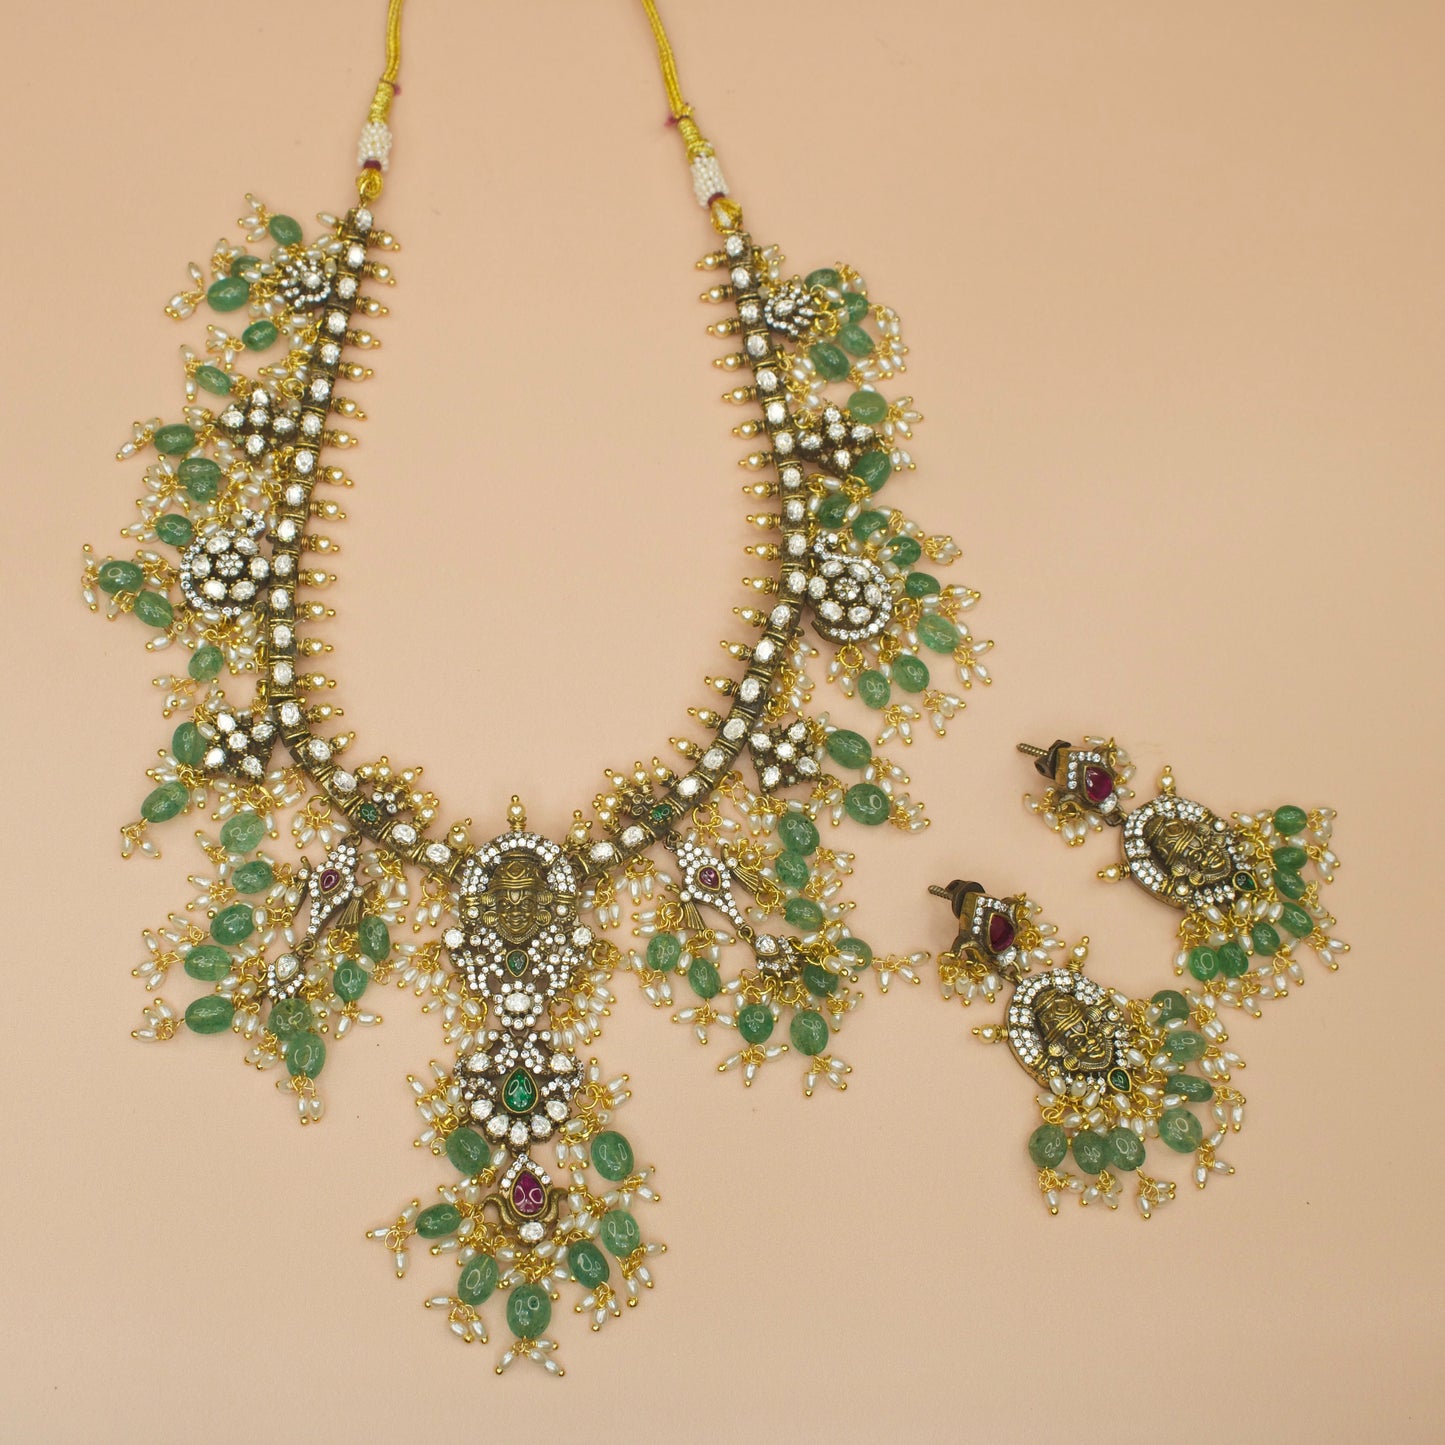 Lord Balaji Victorian Pearls Necklace with Earrings